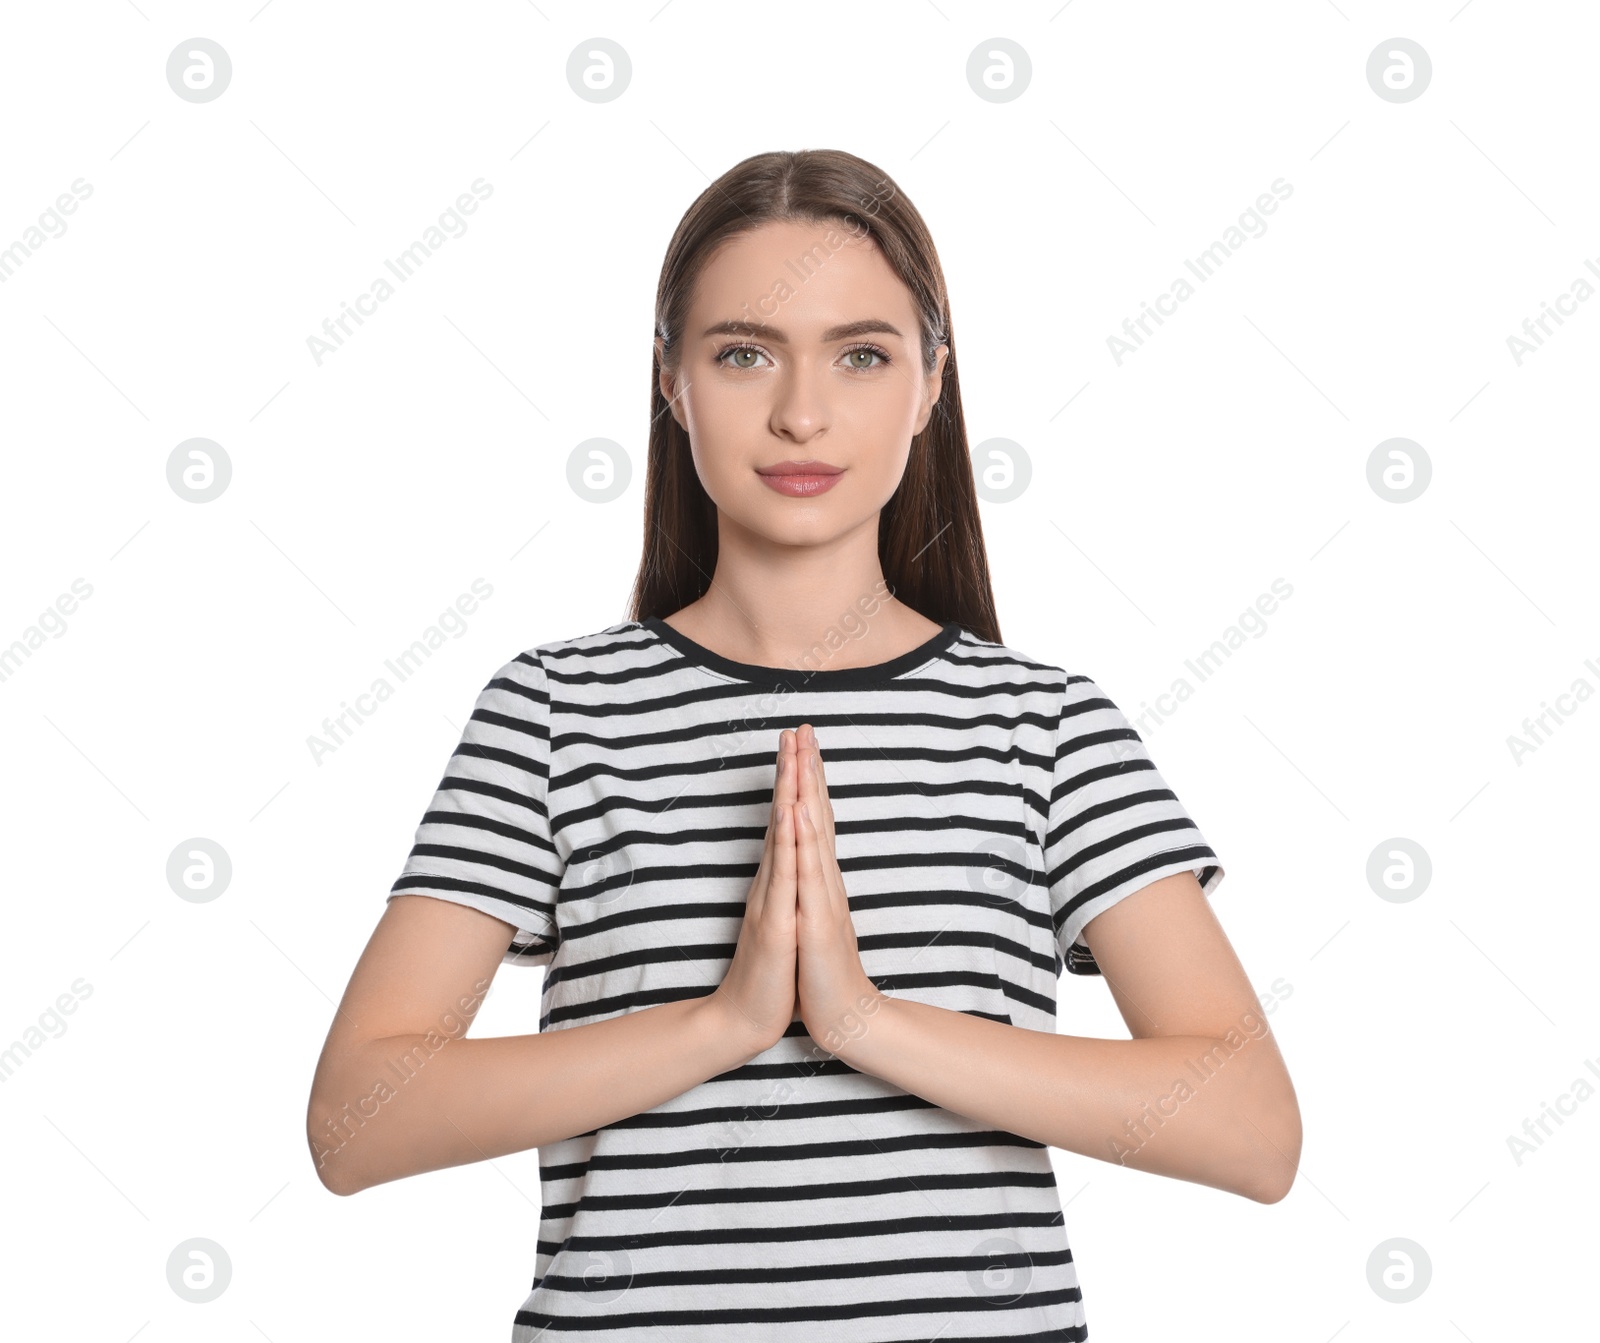 Photo of Woman with clasped hands praying on white background